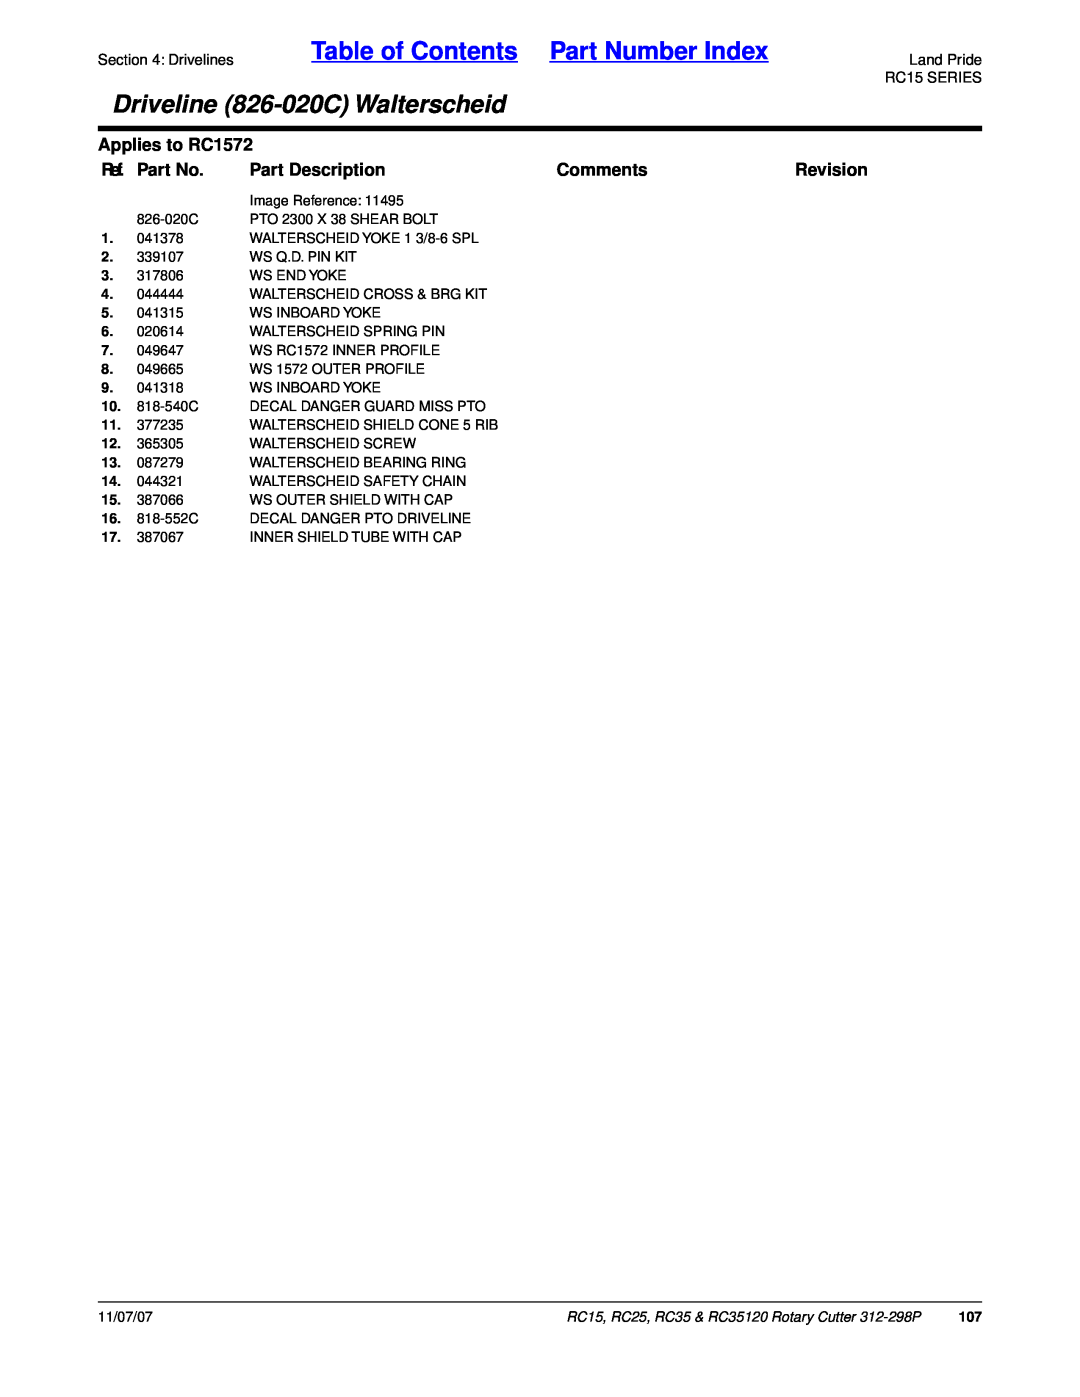 Land Pride RC35 Table of Contents Part Number Index, Driveline 826-020CWalterscheid, Applies to RC1572, Ref. Part No 